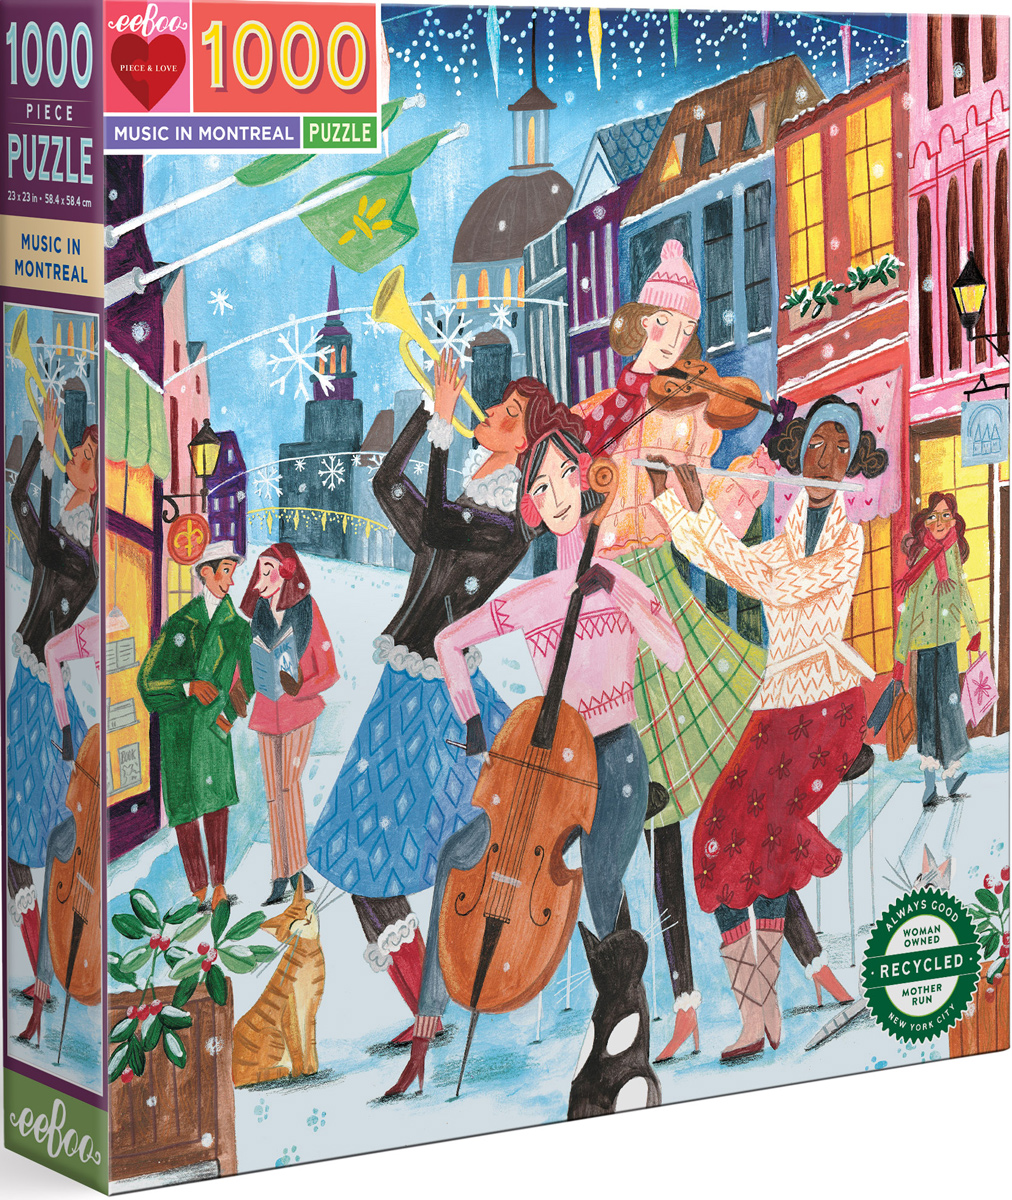 Music in Montreal Music Jigsaw Puzzle